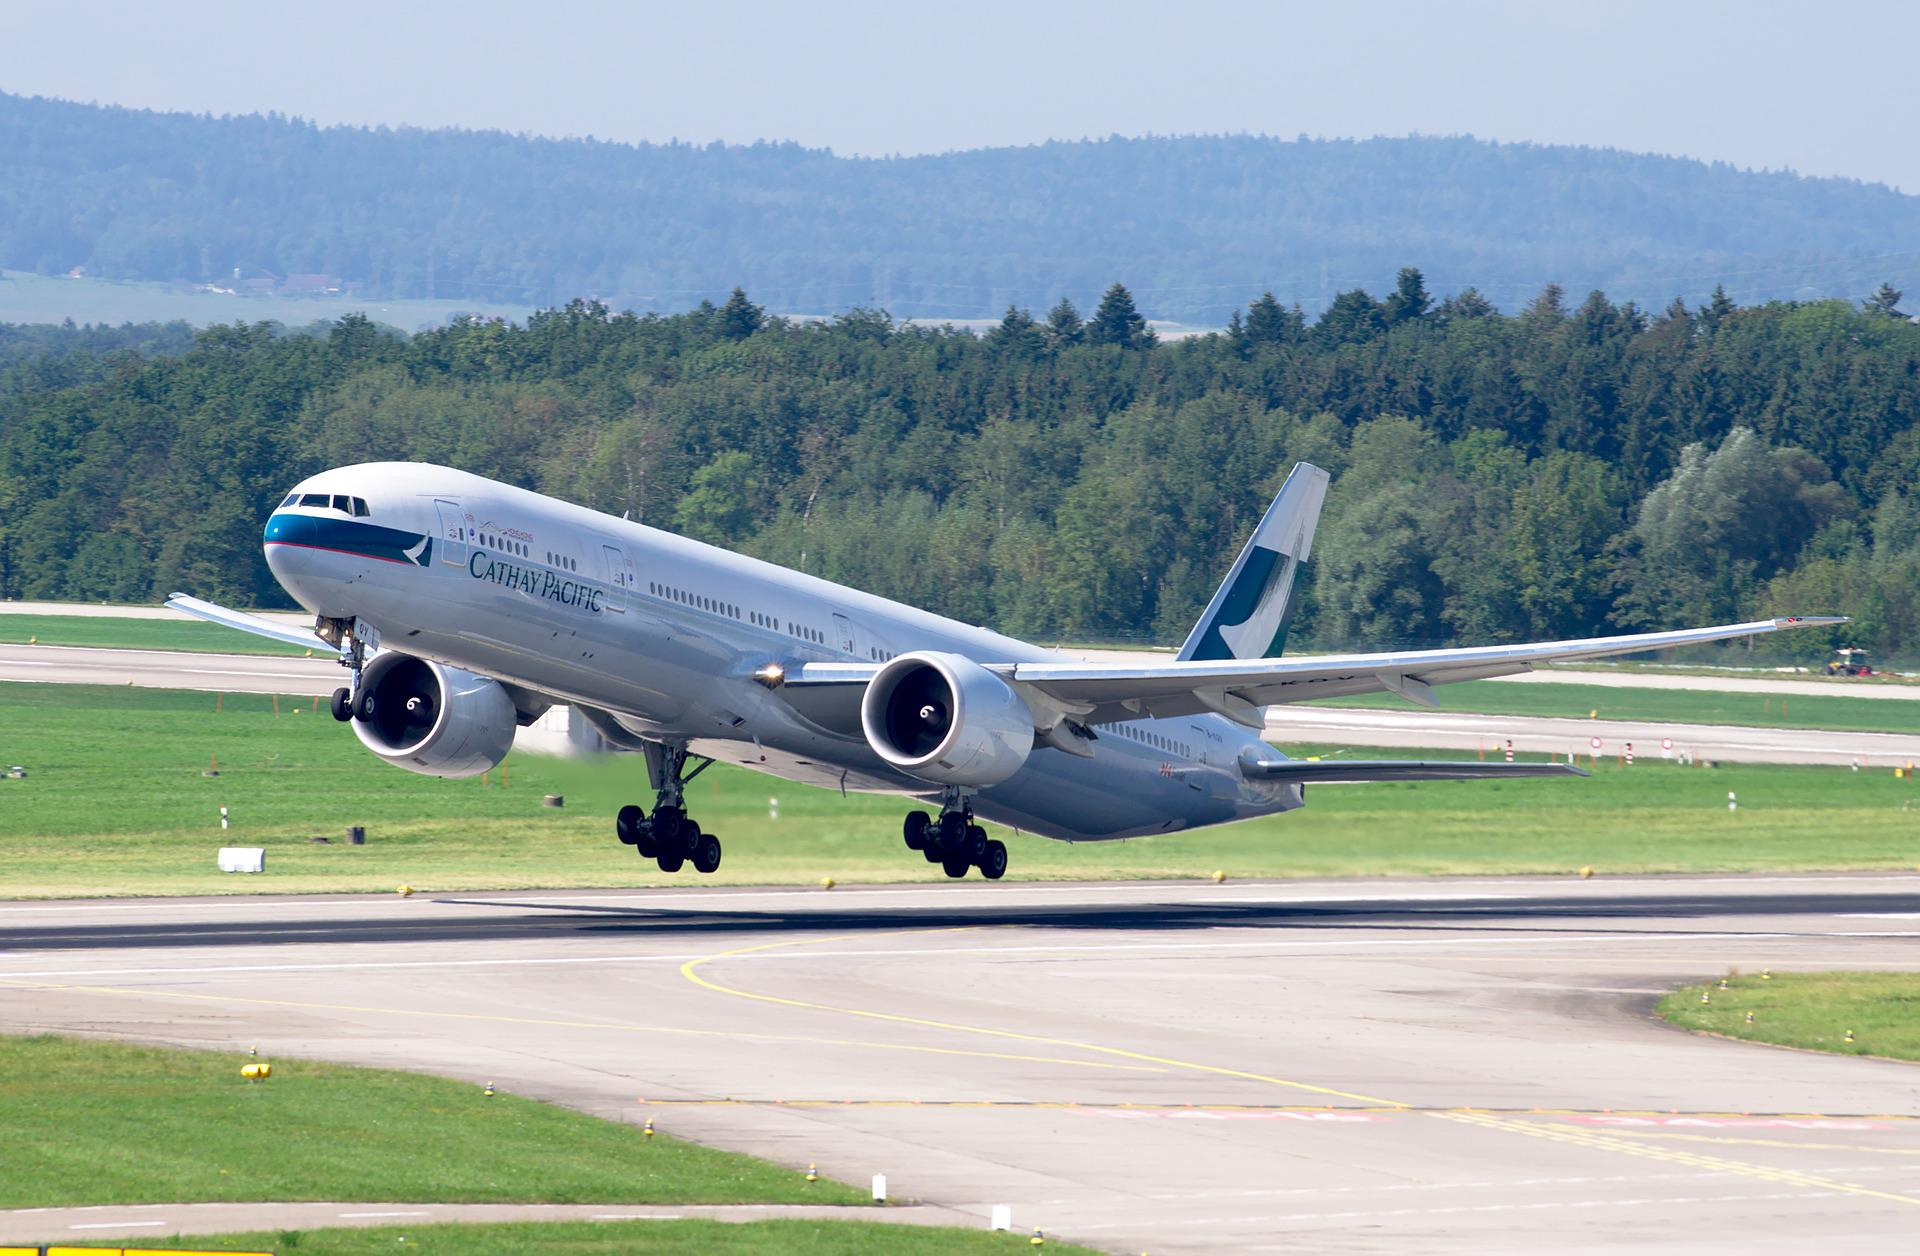 Flight phases: An aircraft taking off from the runway.